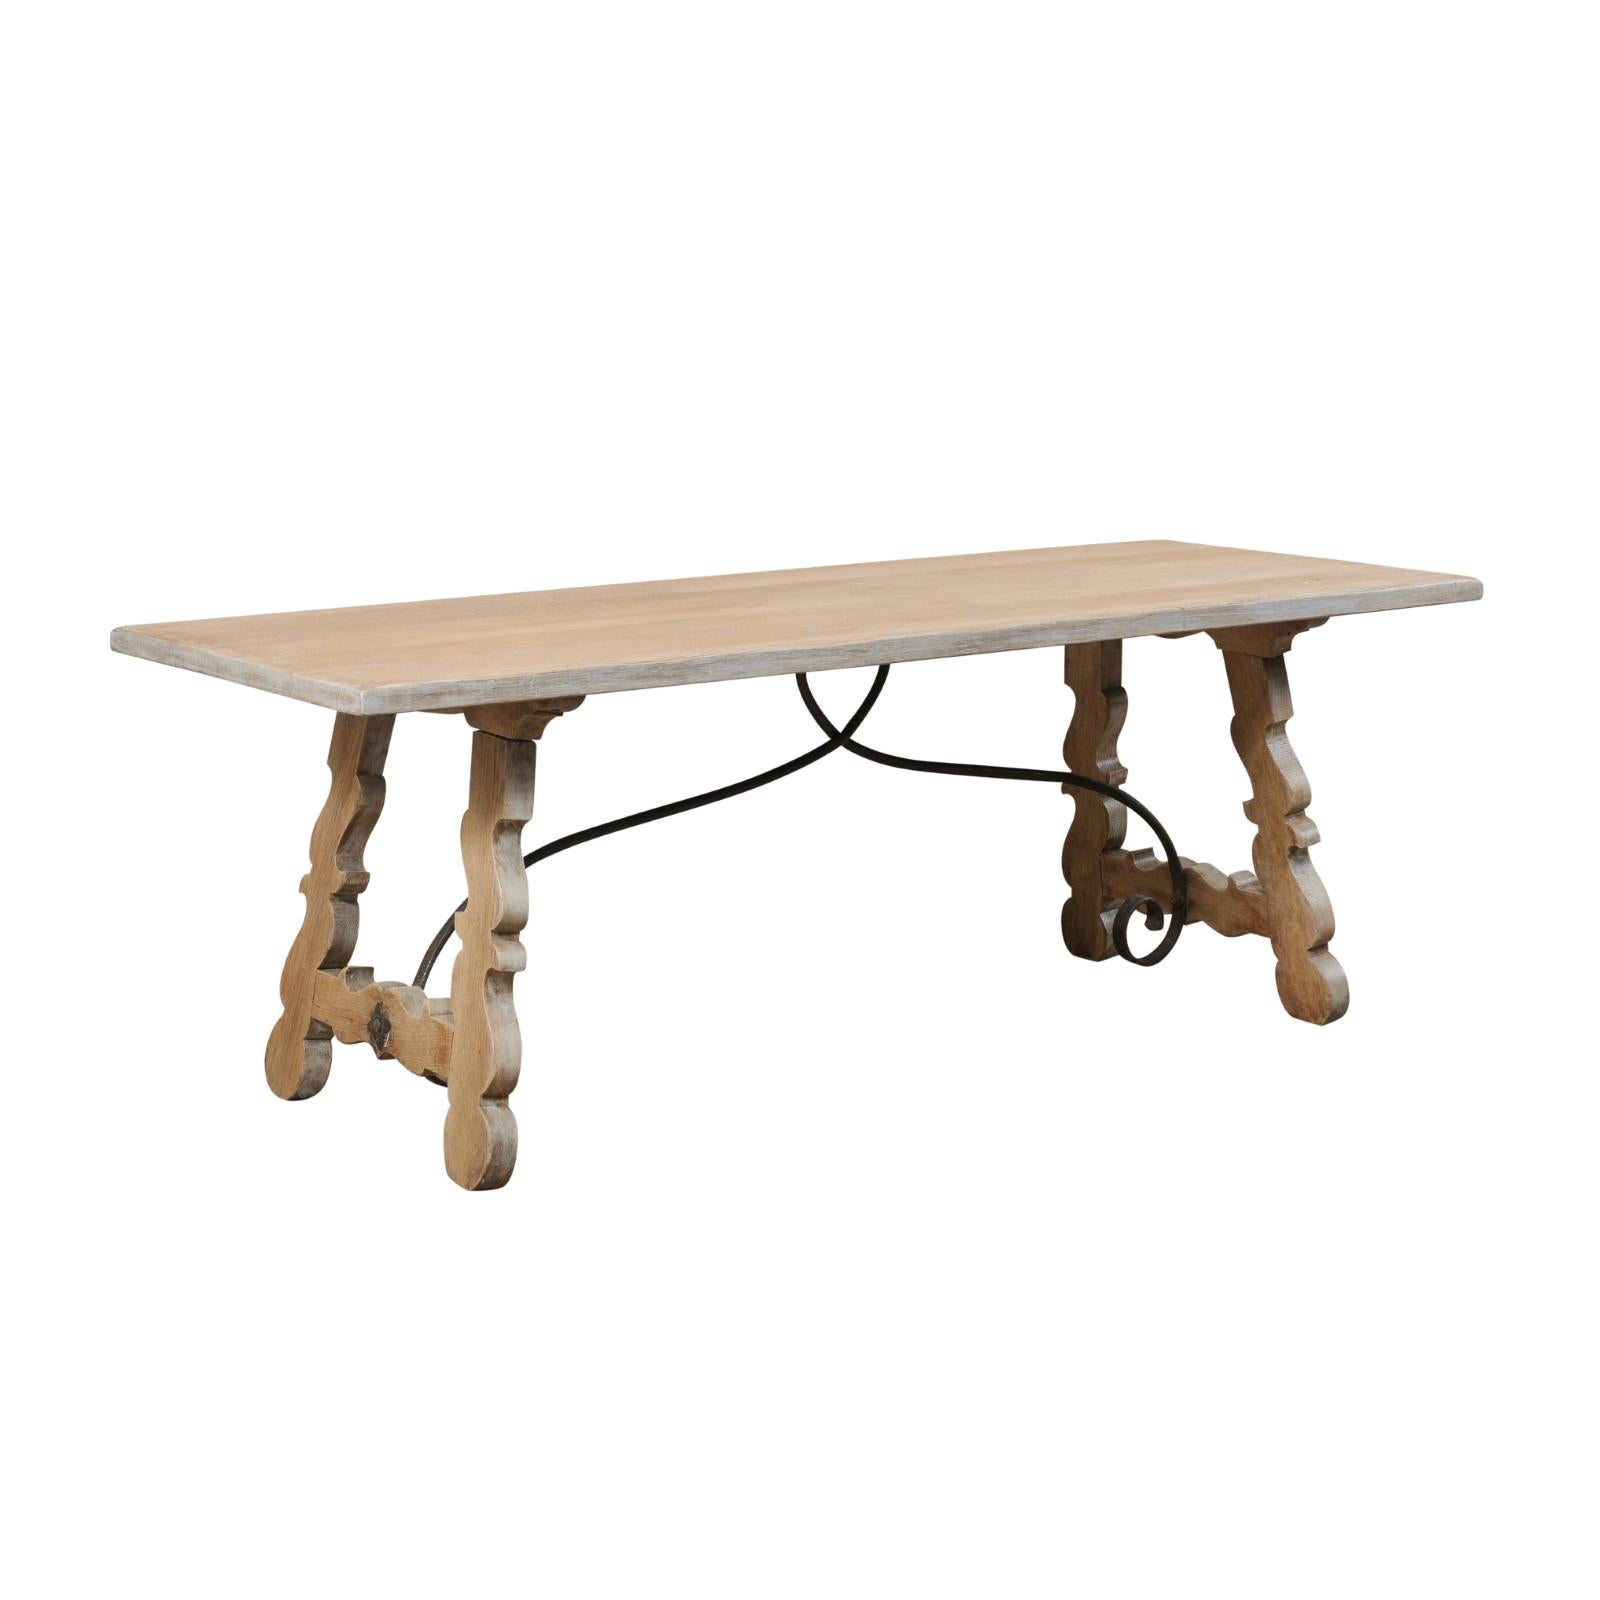 French Oak Trestle Table with Iron Stretcher, Mid-20th Century